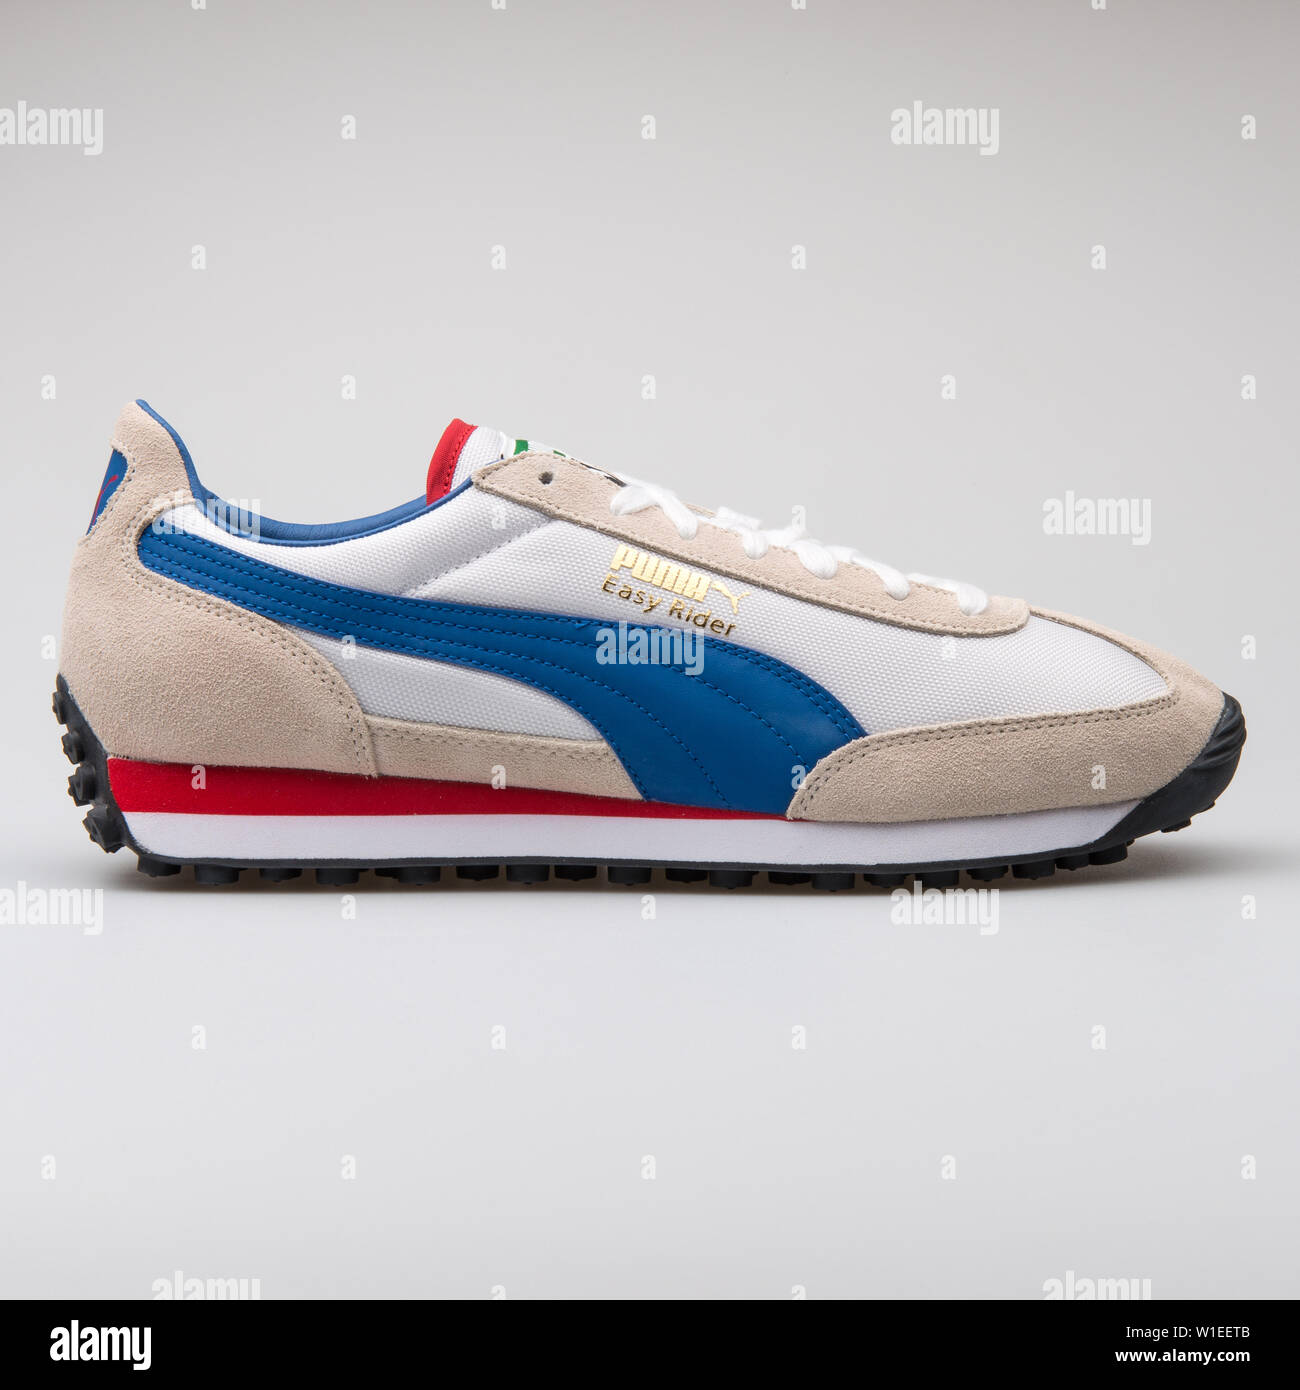 VIENNA, AUSTRIA - AUGUST 7, 2017: Puma Easy Rider white, blue and red  sneaker on white background Stock Photo - Alamy